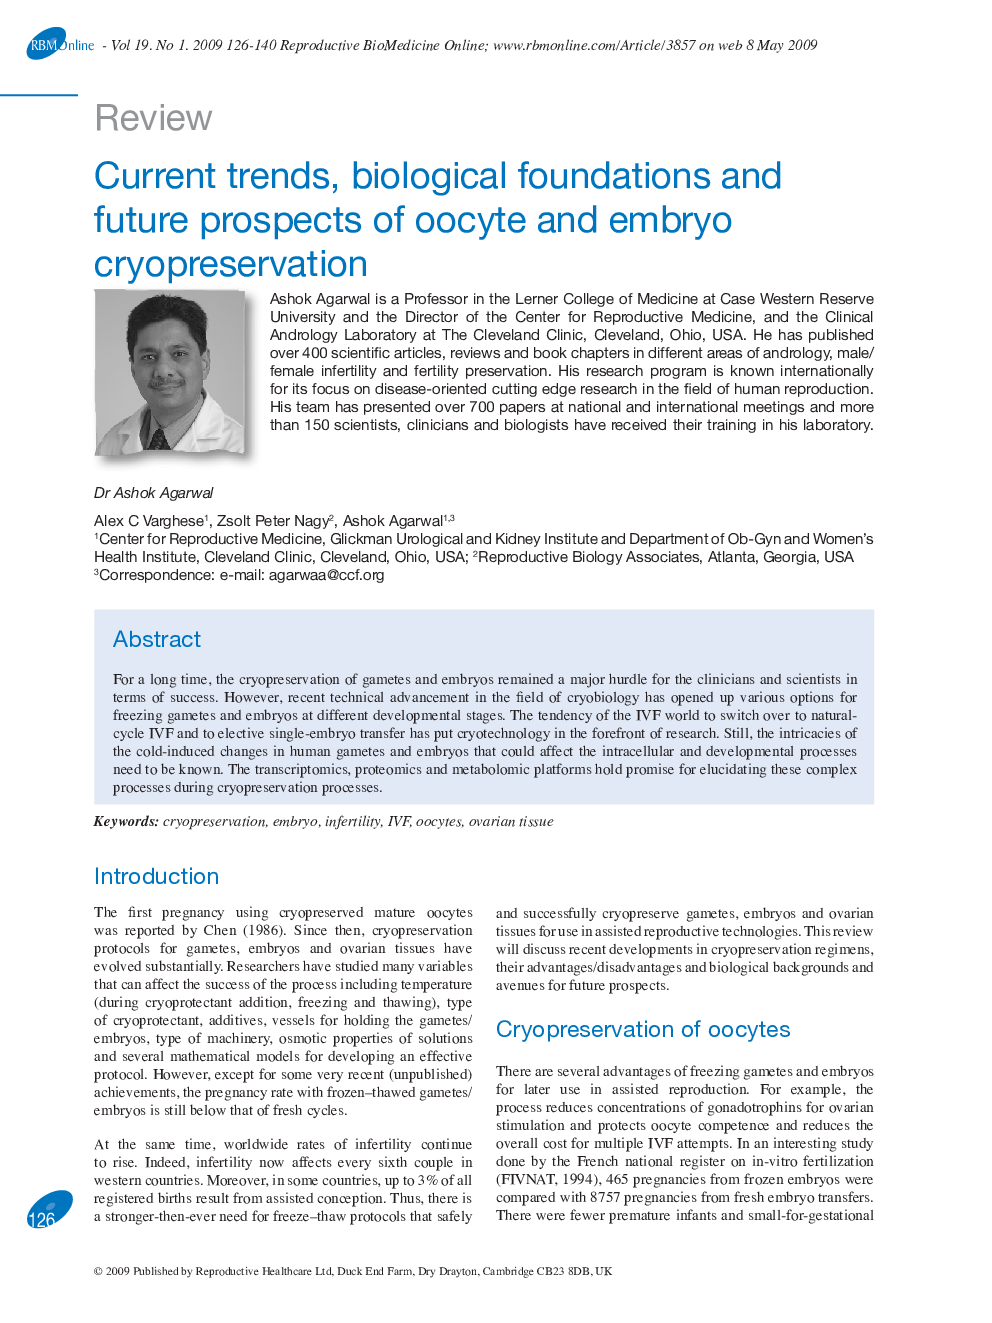 Current trends, biological foundations and future prospects of oocyte and embryo cryopreservation 